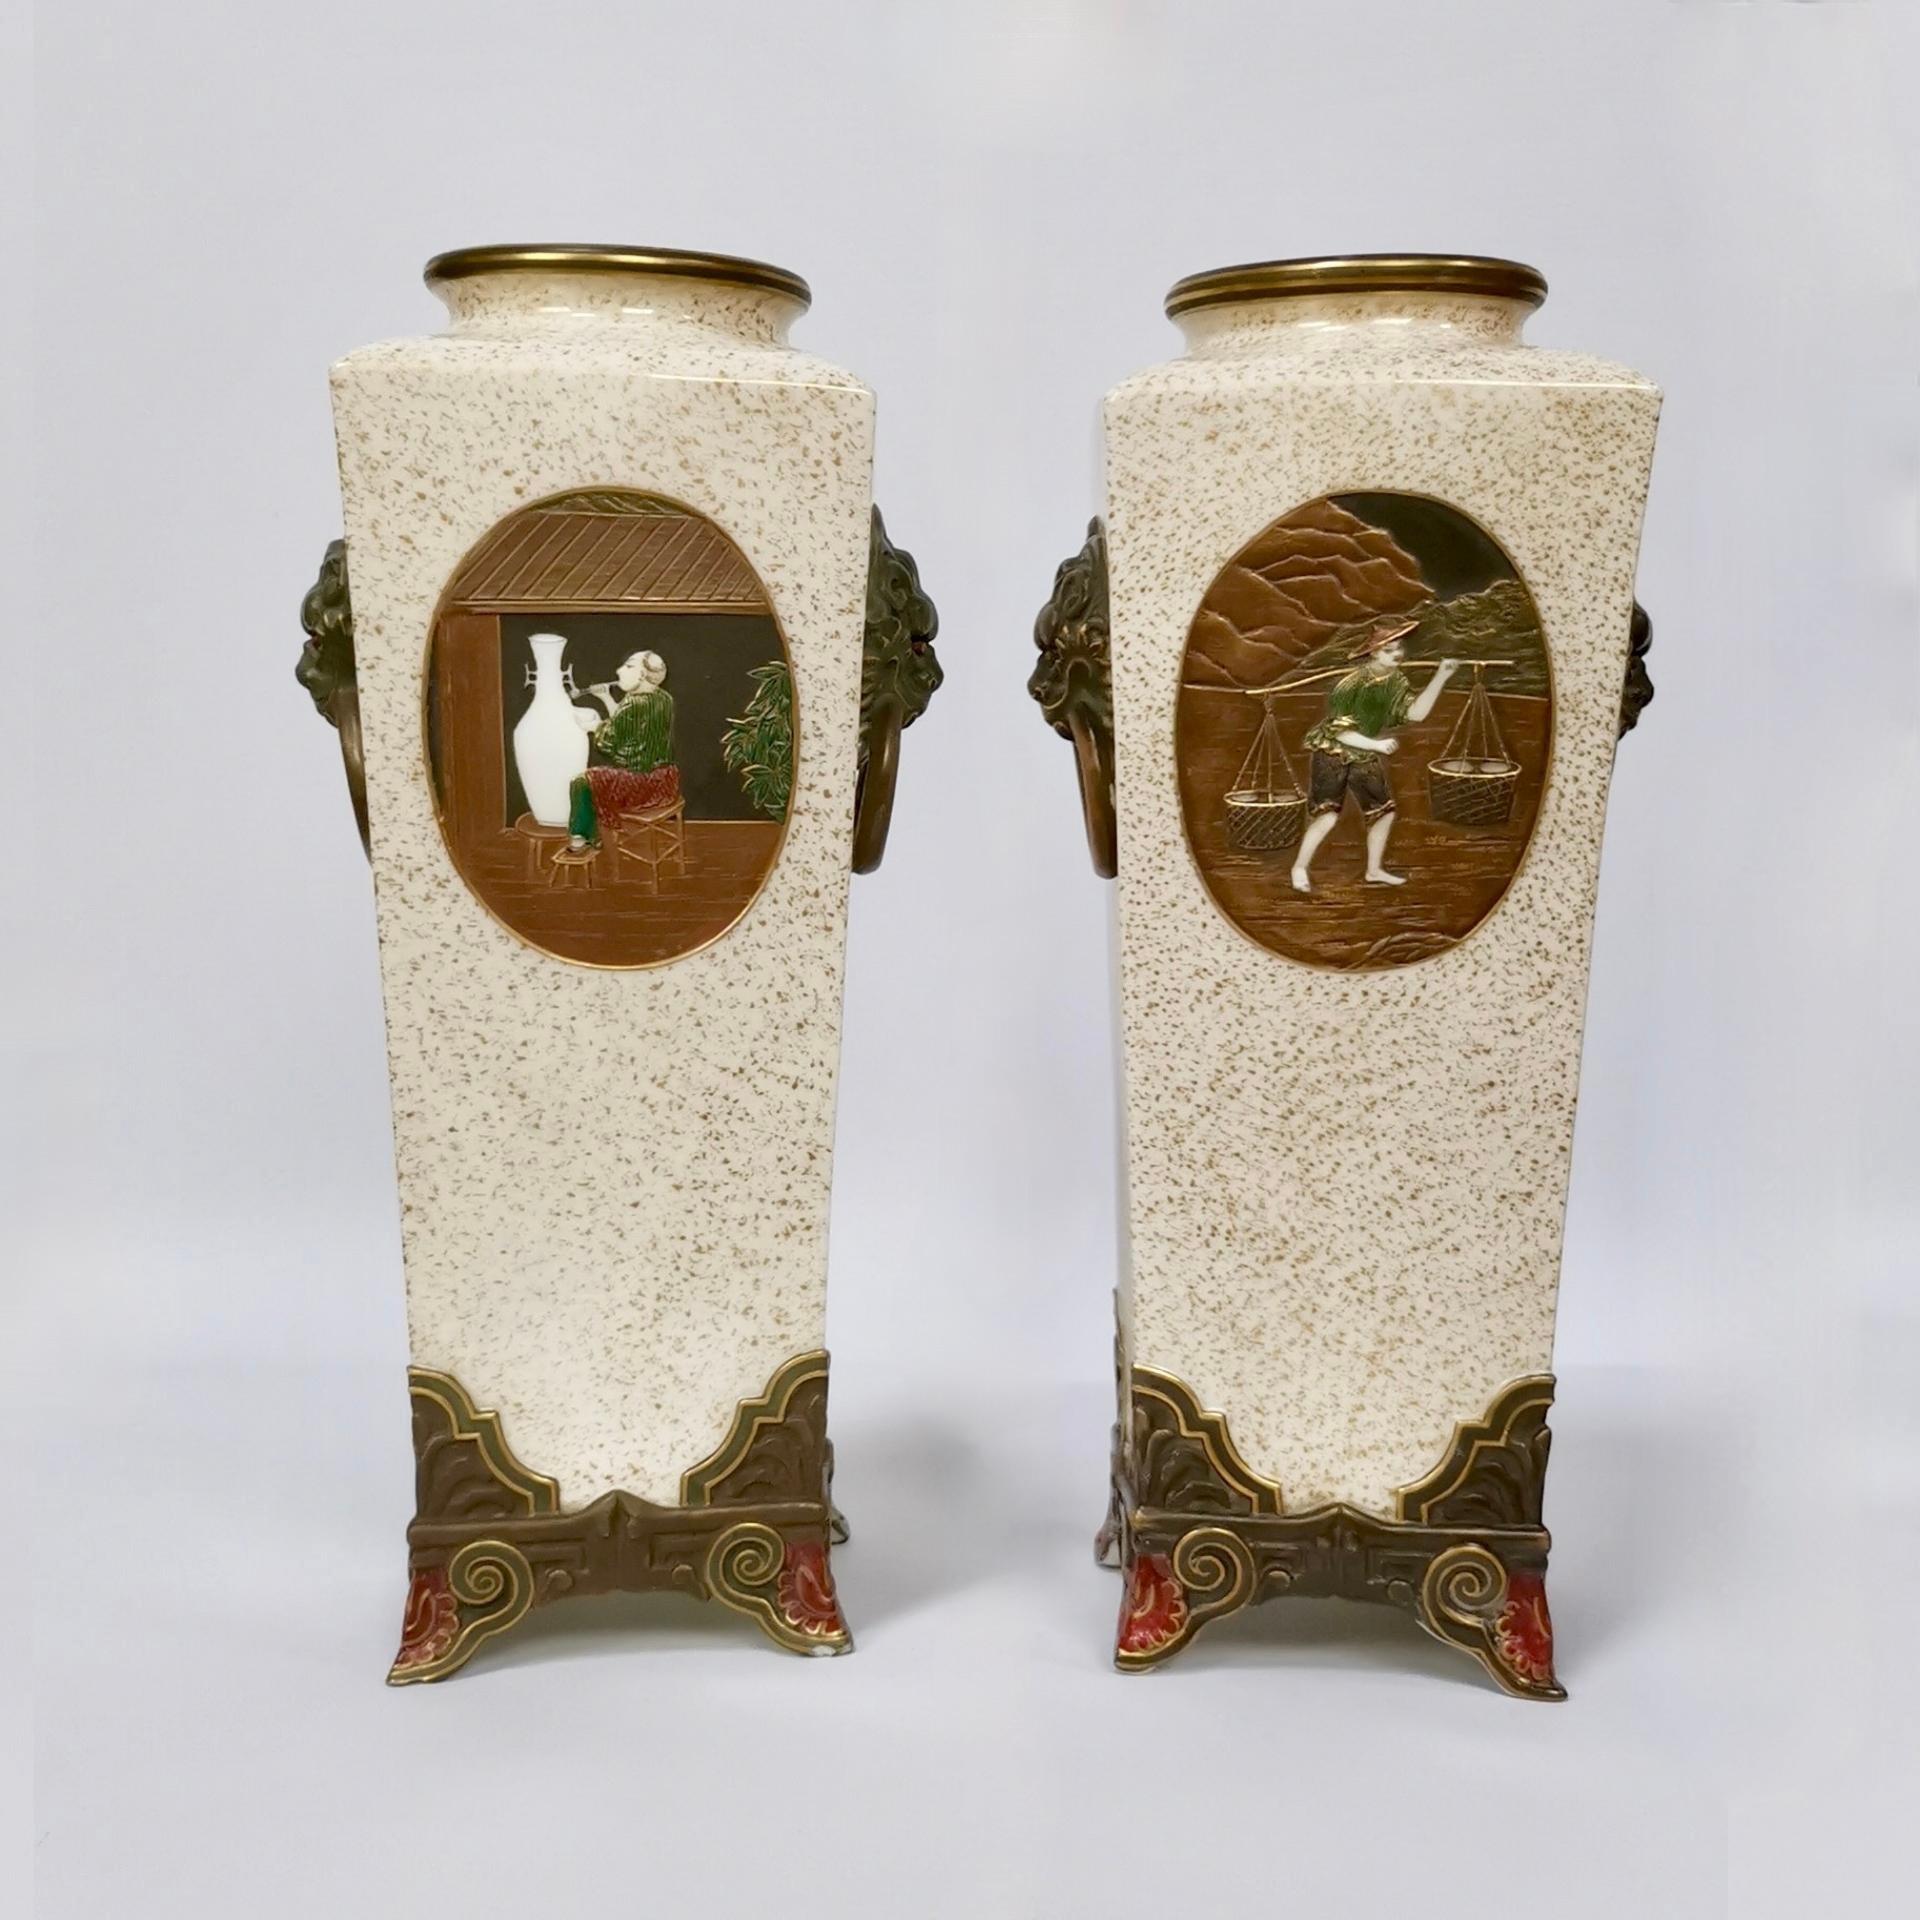 Porcelain Royal Worcester Garniture of 3 Vases, Japan style, Hadley and Callowhill, 1873